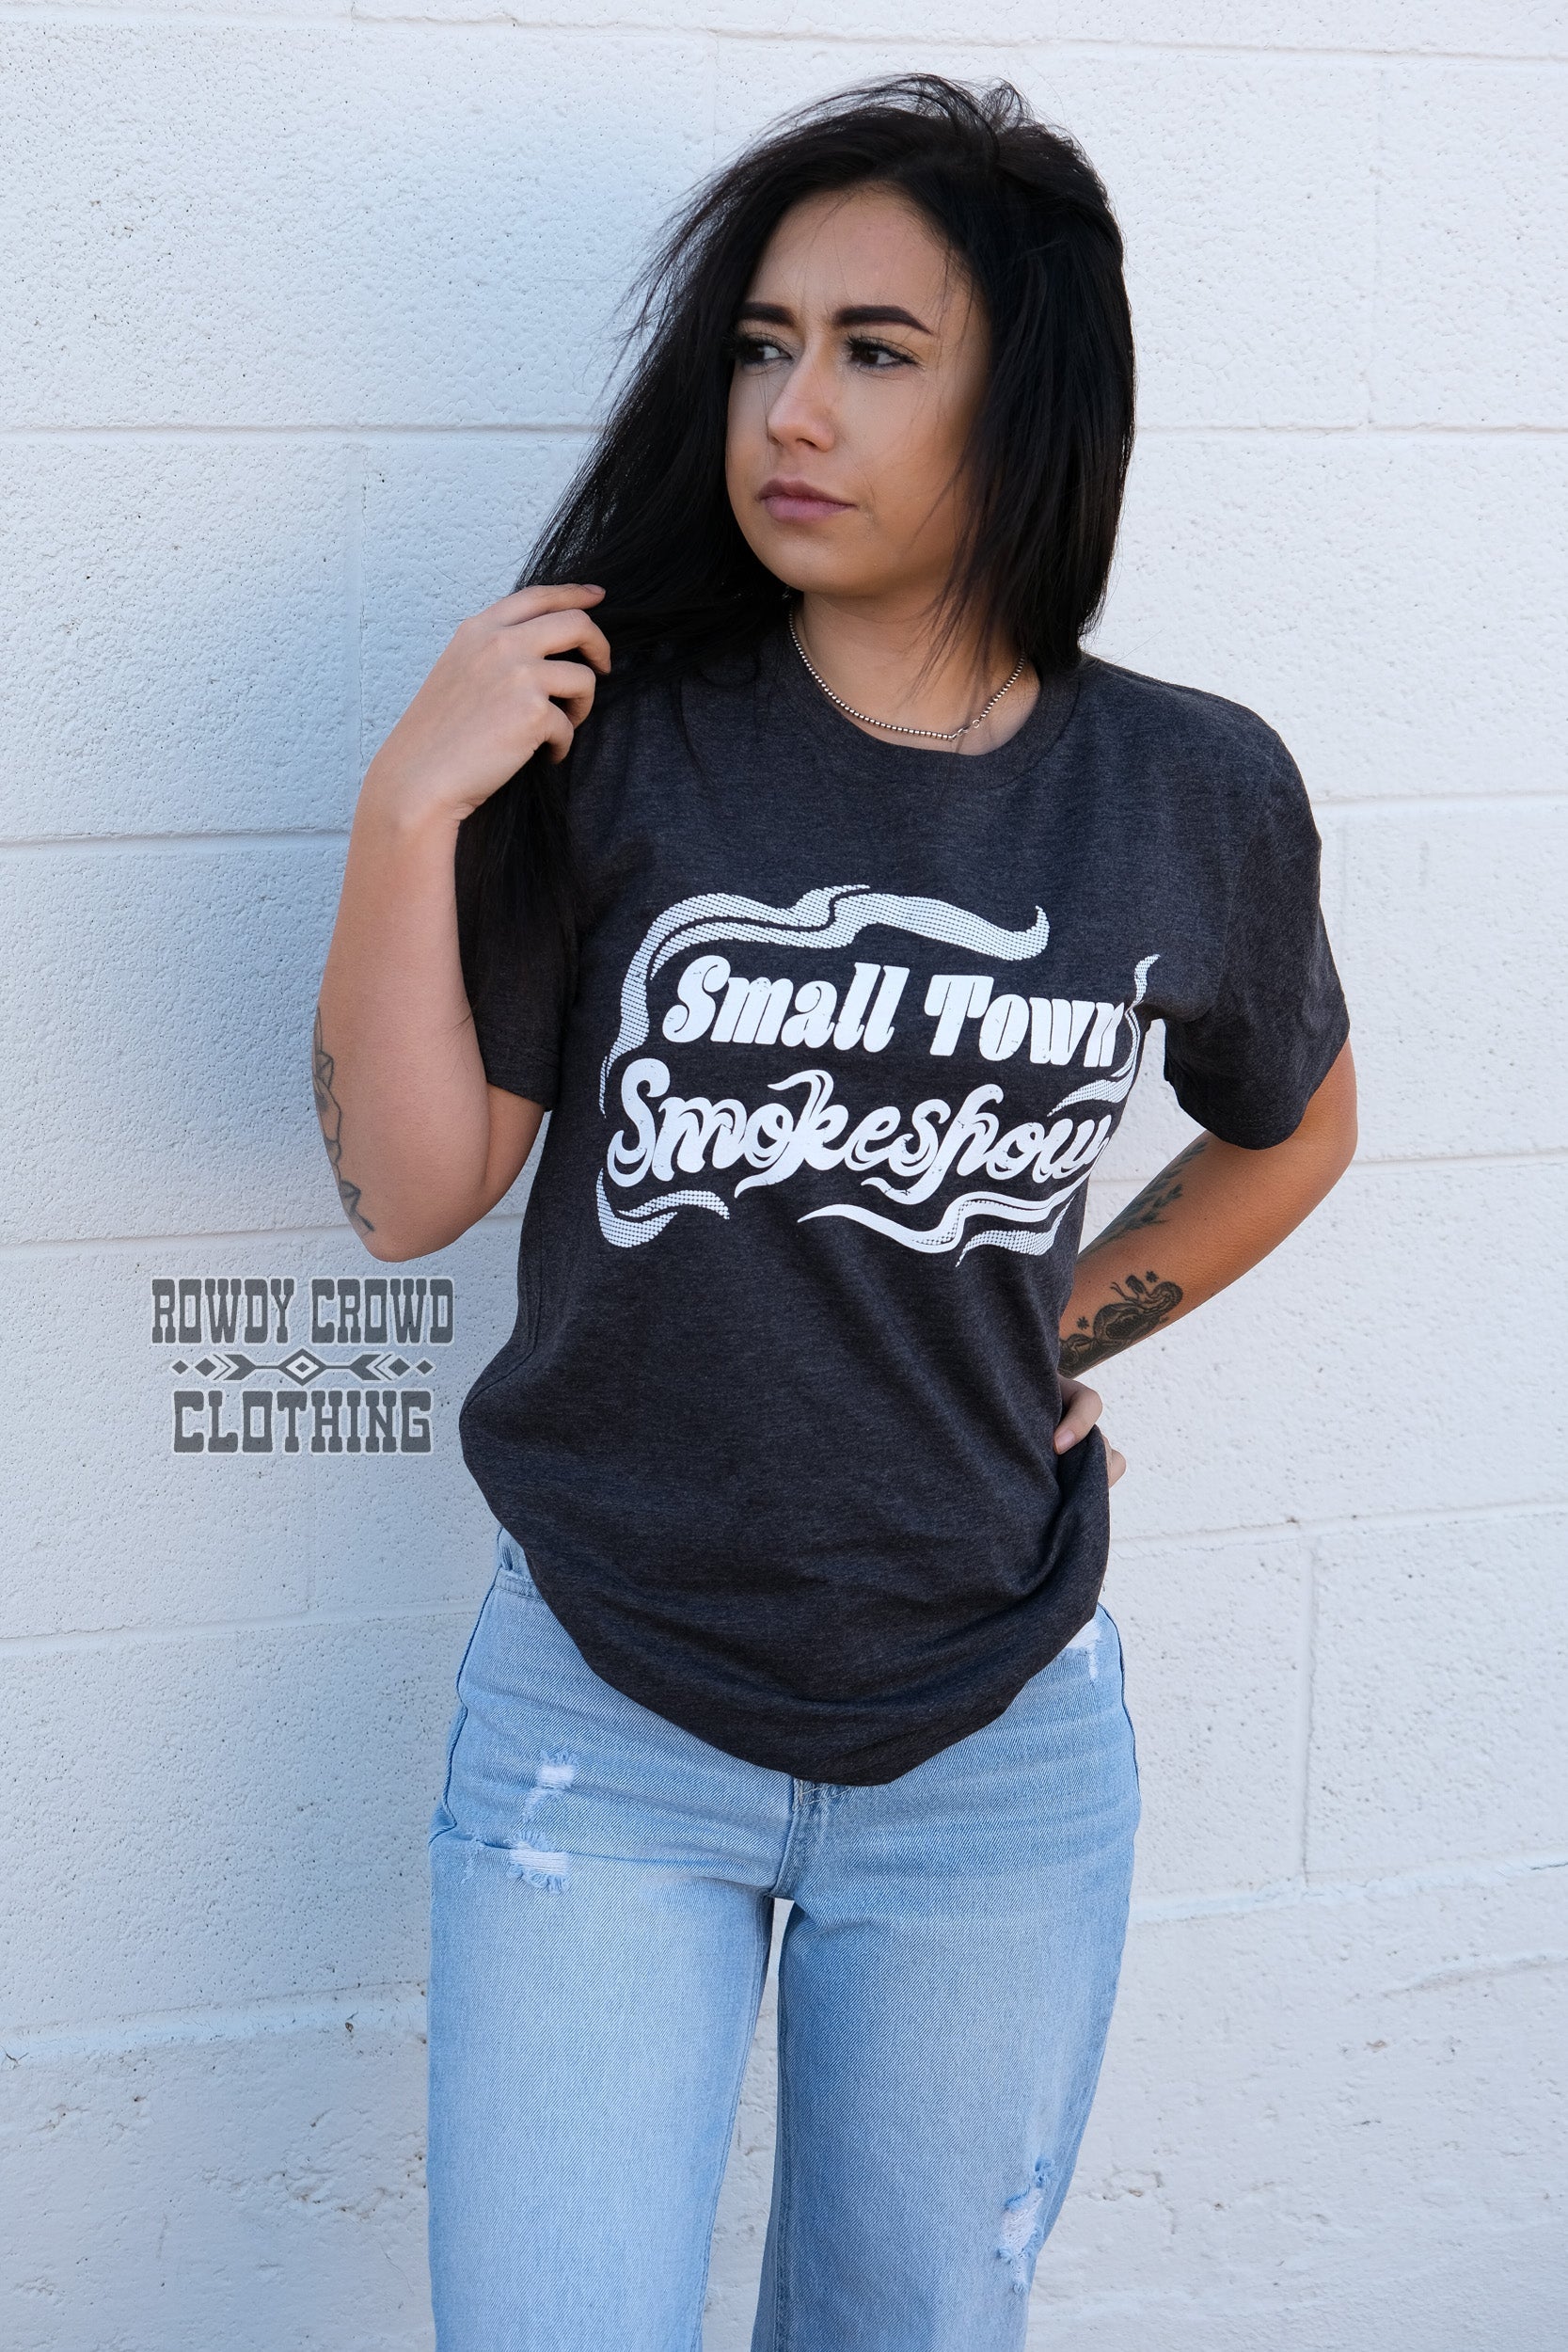 western apparel, western graphic tee, graphic western tees, wholesale clothing, western wholesale, women's western graphic tees, wholesale clothing and jewelry, western boutique clothing, western women's graphic tee, smokeshow tee, smokeshow graphic tee